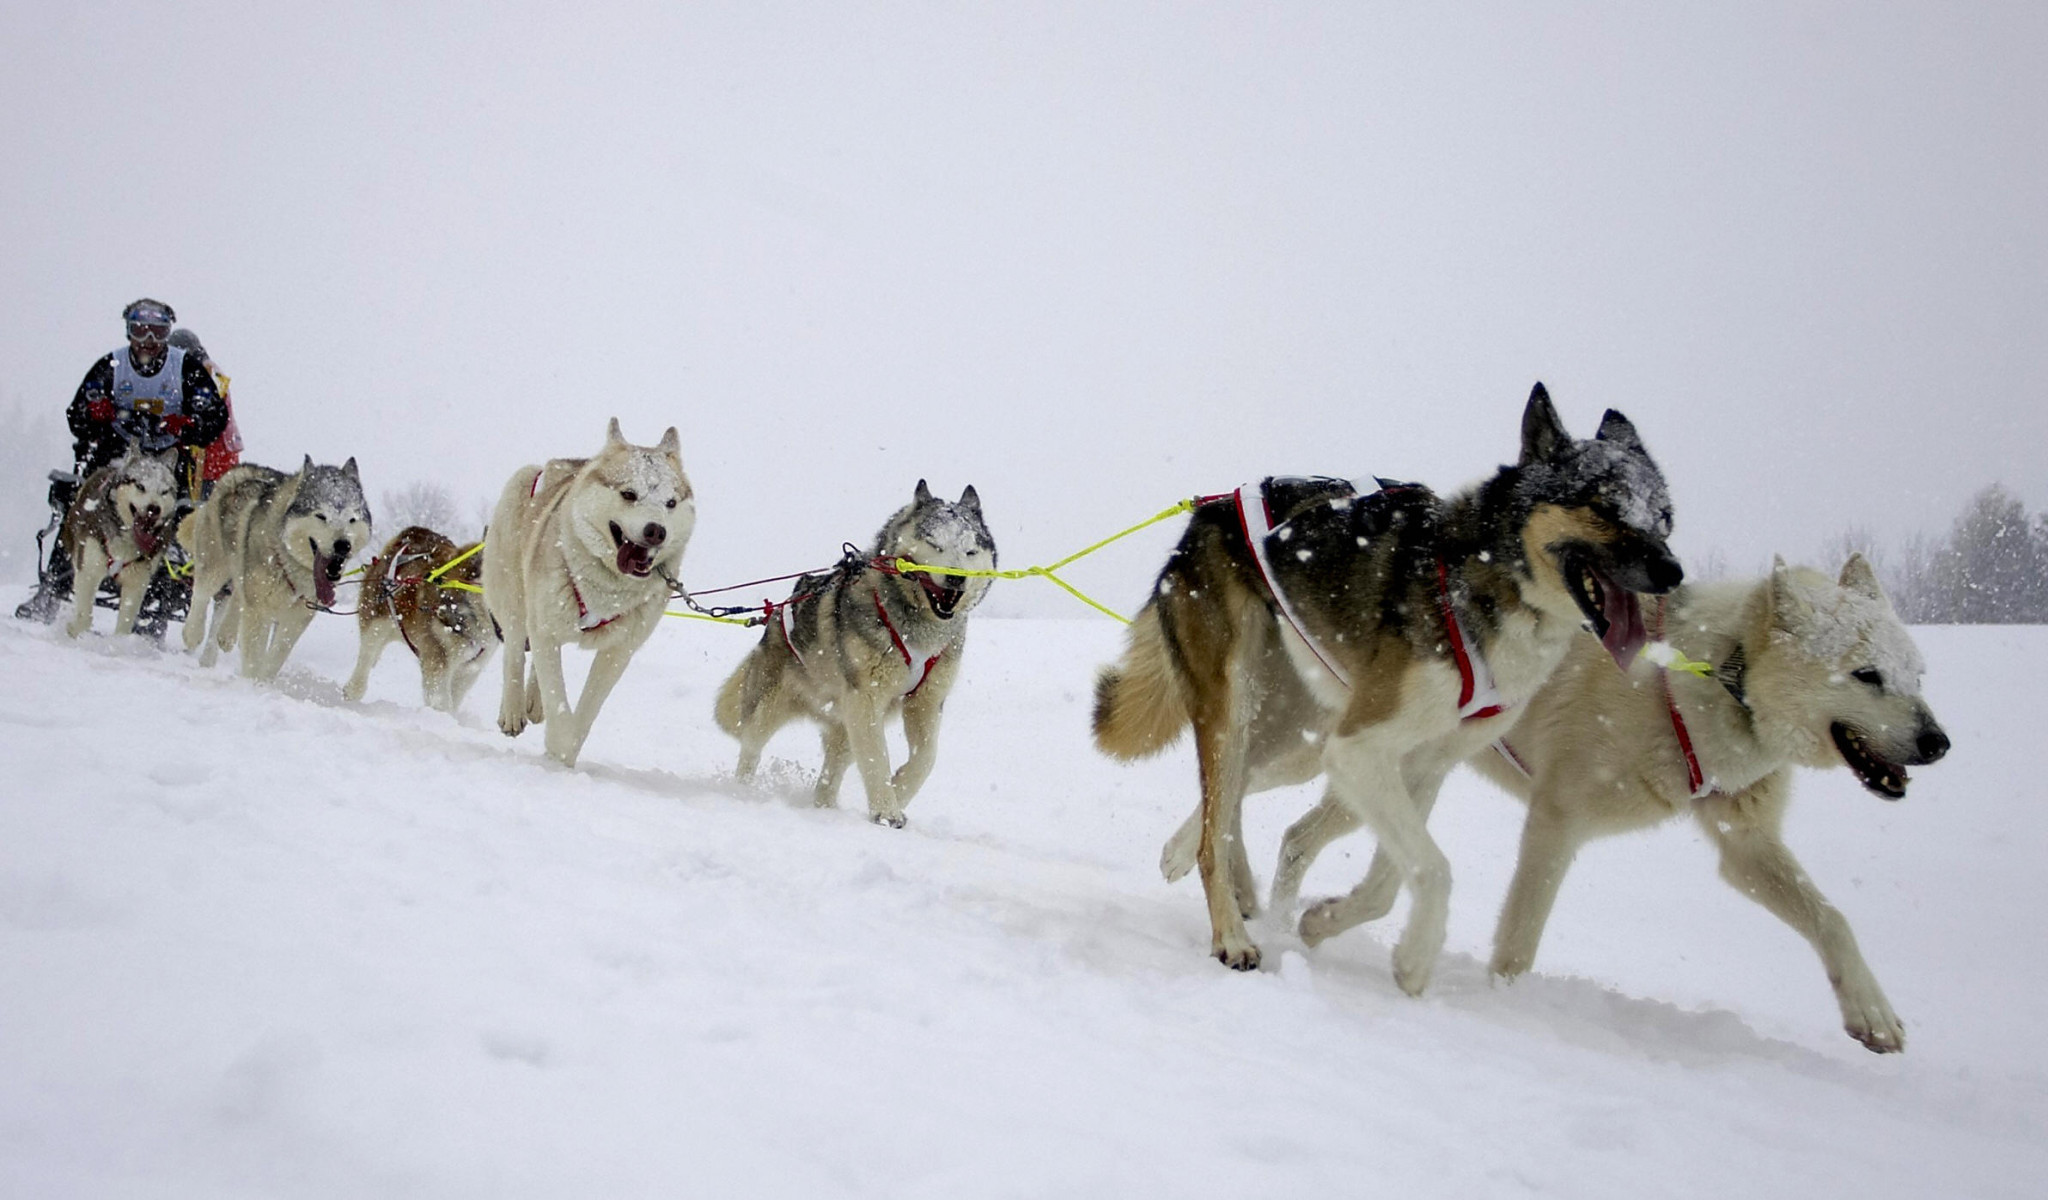 The International Federation of Sleddog Sports has announced an update to its rules of racing ahead of the 2020-21 season ©Getty Images